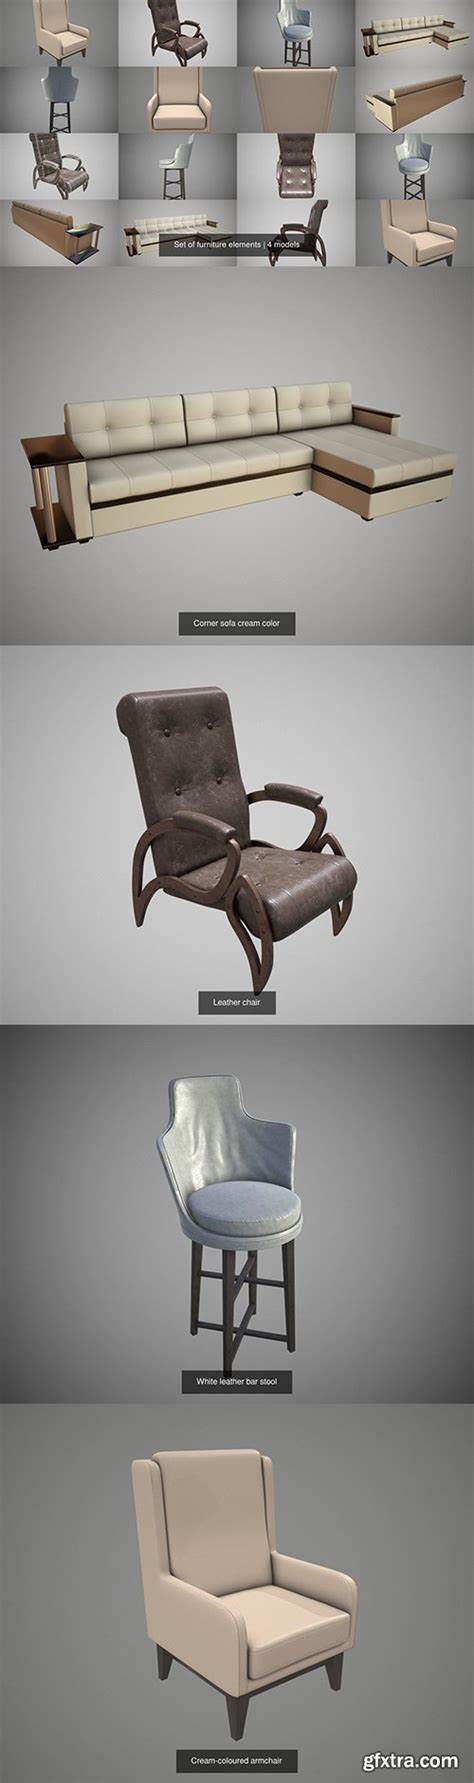 cgtrader set of furniture elements 3d model collection gfxtra